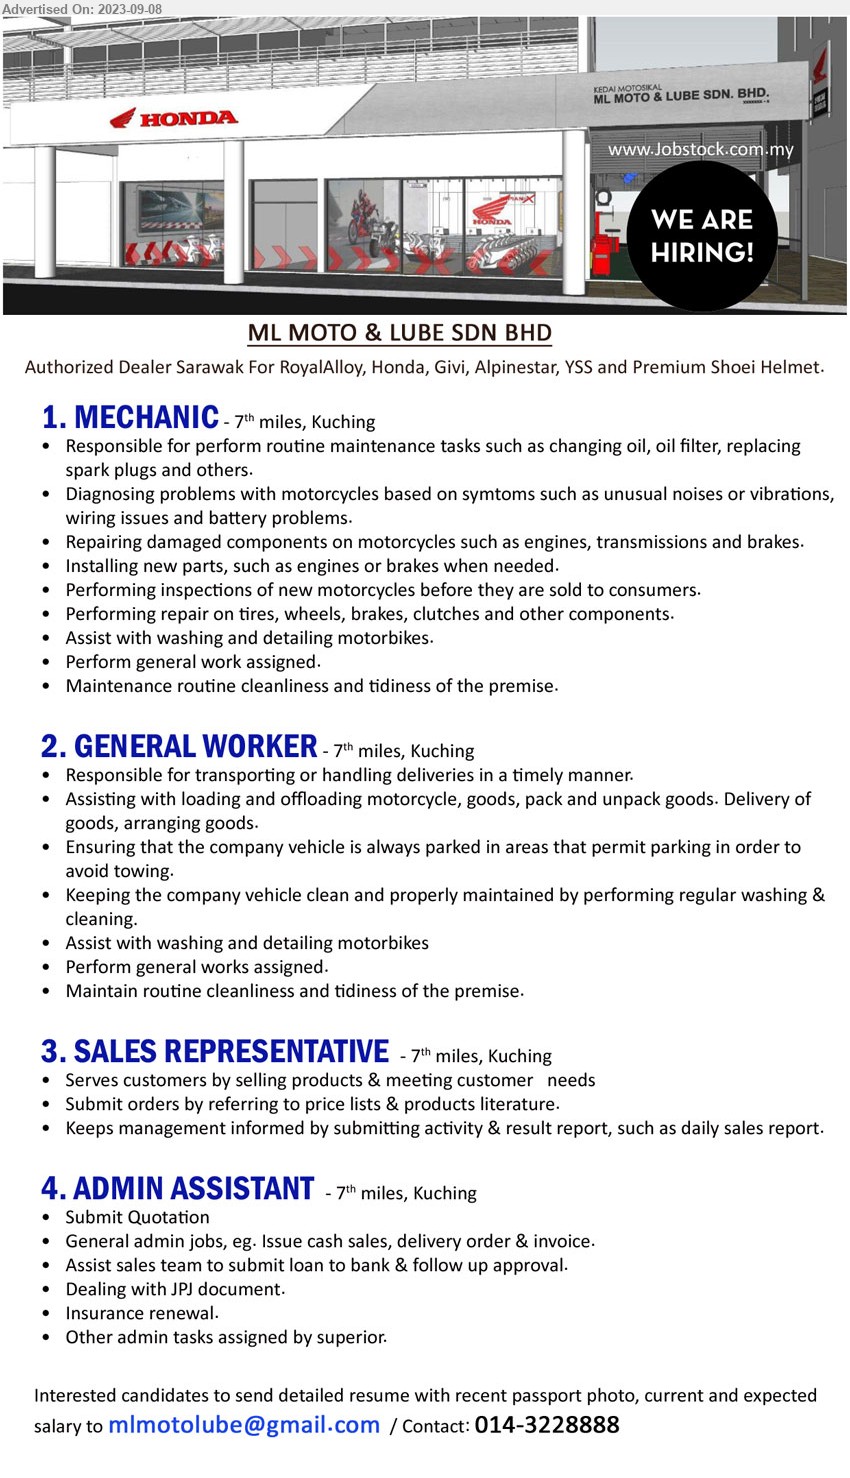 ML MOTO & LUBE SDN BHD - 1. MECHANIC  (Kuching), Responsible for perform routine maintenance tasks such as changing oil, oil filter, replacing 
spark plugs and others,...
2. GENERAL WORKER (Kuching), Keeping the company vehicle clean and properly maintained by performing regular washing & 
cleaning,...
3. SALES REPRESENTATIVE (Kuching),Serves customers by selling products & meeting customer needs ,...
4. ADMIN ASSISTANT (Kuching), General admin jobs, eg. Issue cash sales, delivery order & invoice,...
Contact: 014-3228888 / Email resume to ...